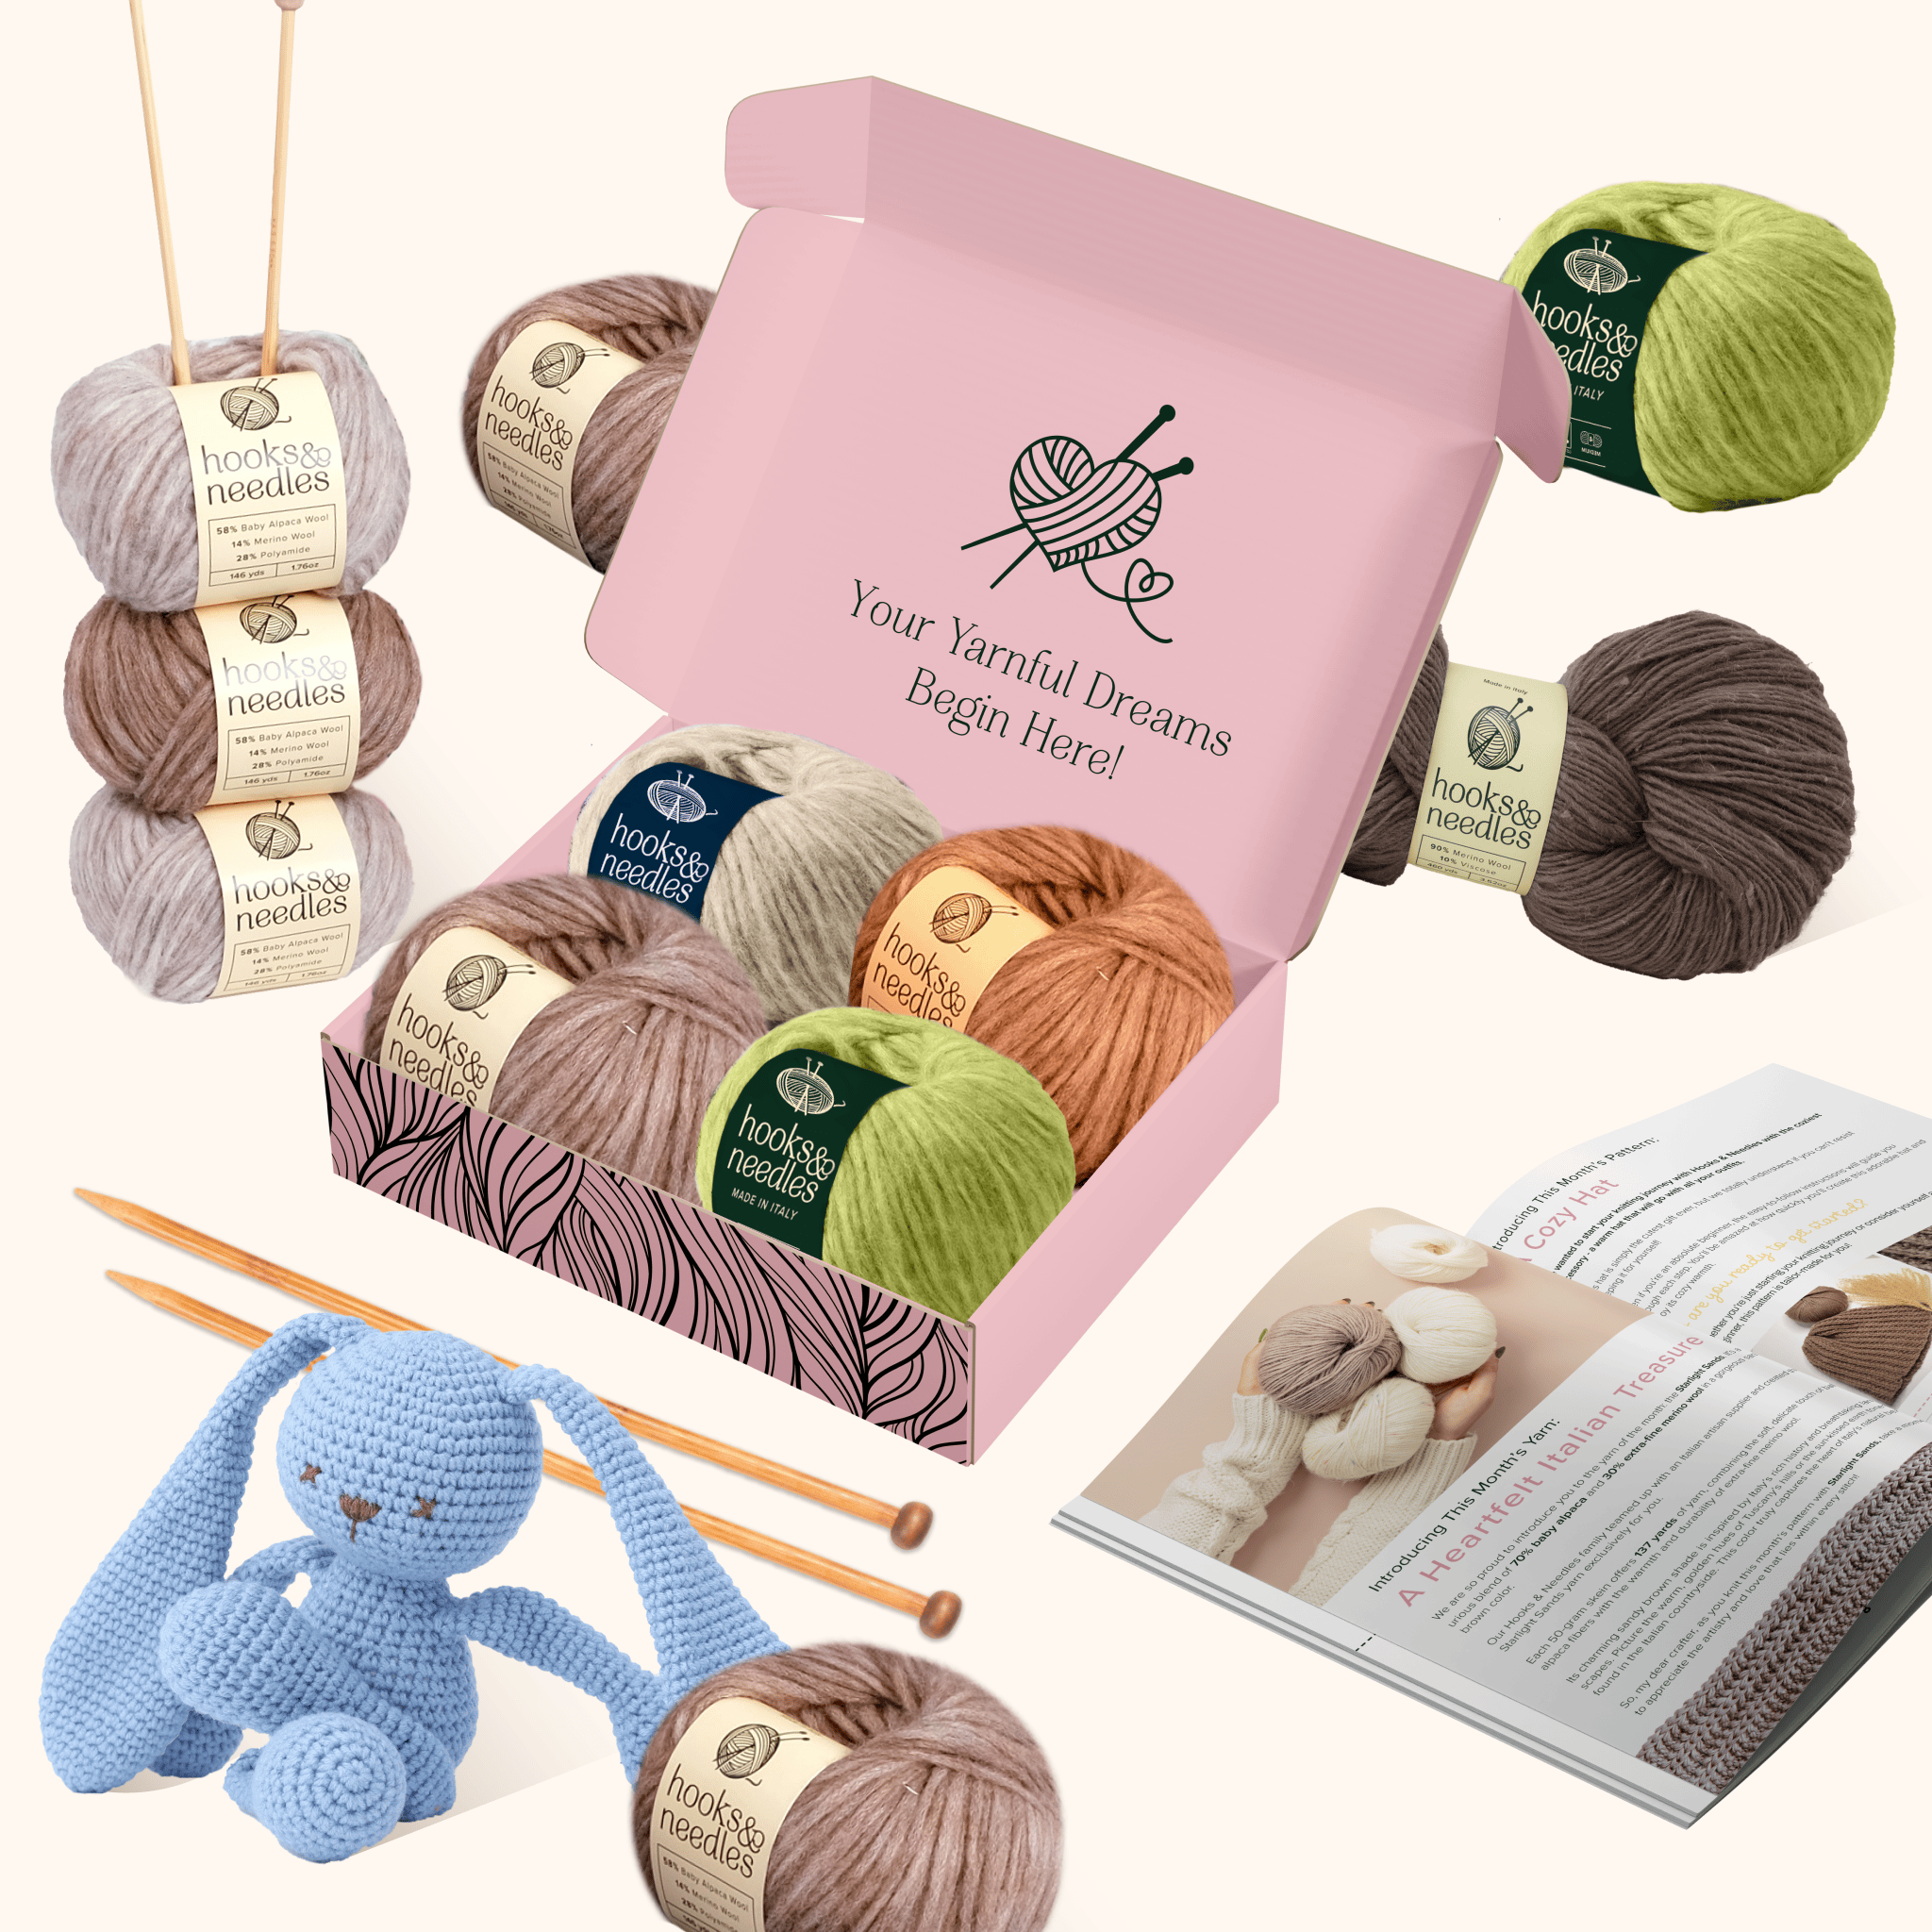 A 6-Month-Prepaid Hooks & Needles Subscription Box #3 with yarn balls, crochet hooks, knitting needles, a pattern book, and a finished crocheted rabbit, displayed against a plain background.